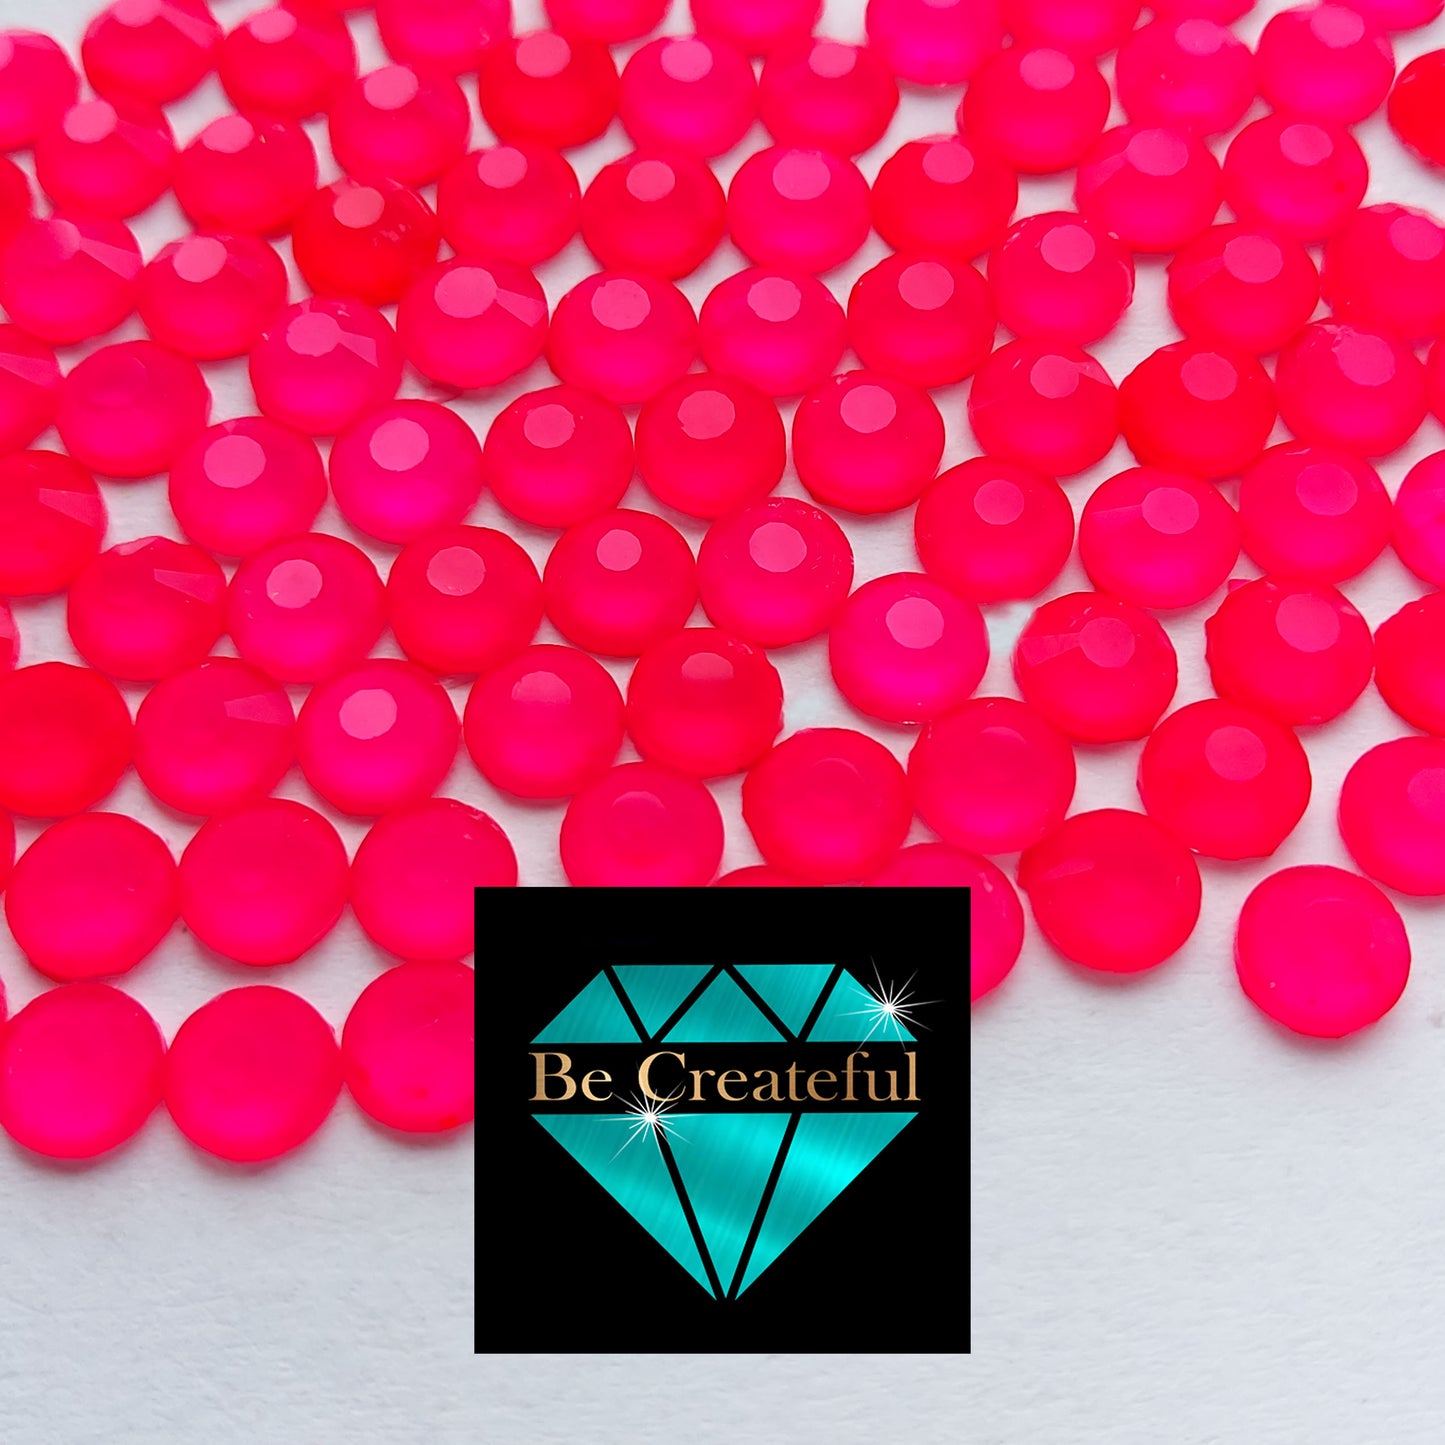 LUXE® Neon Pink Hotfix Rhinestones are high-quality 16 facet glass Rhinestone that provides intense sparkle and refraction.